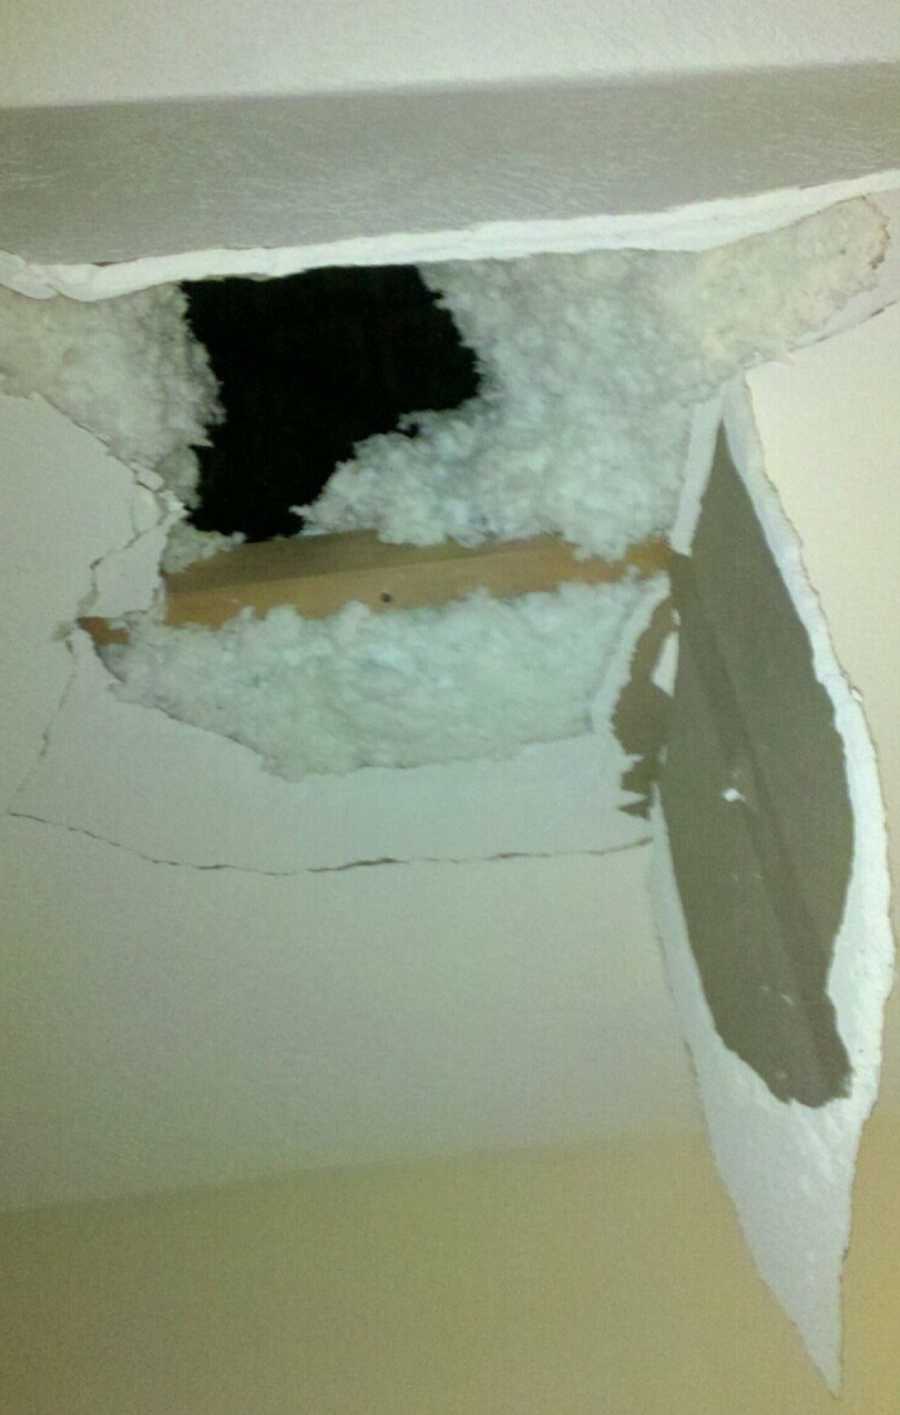 Hole in ceiling from kids jumping in attic